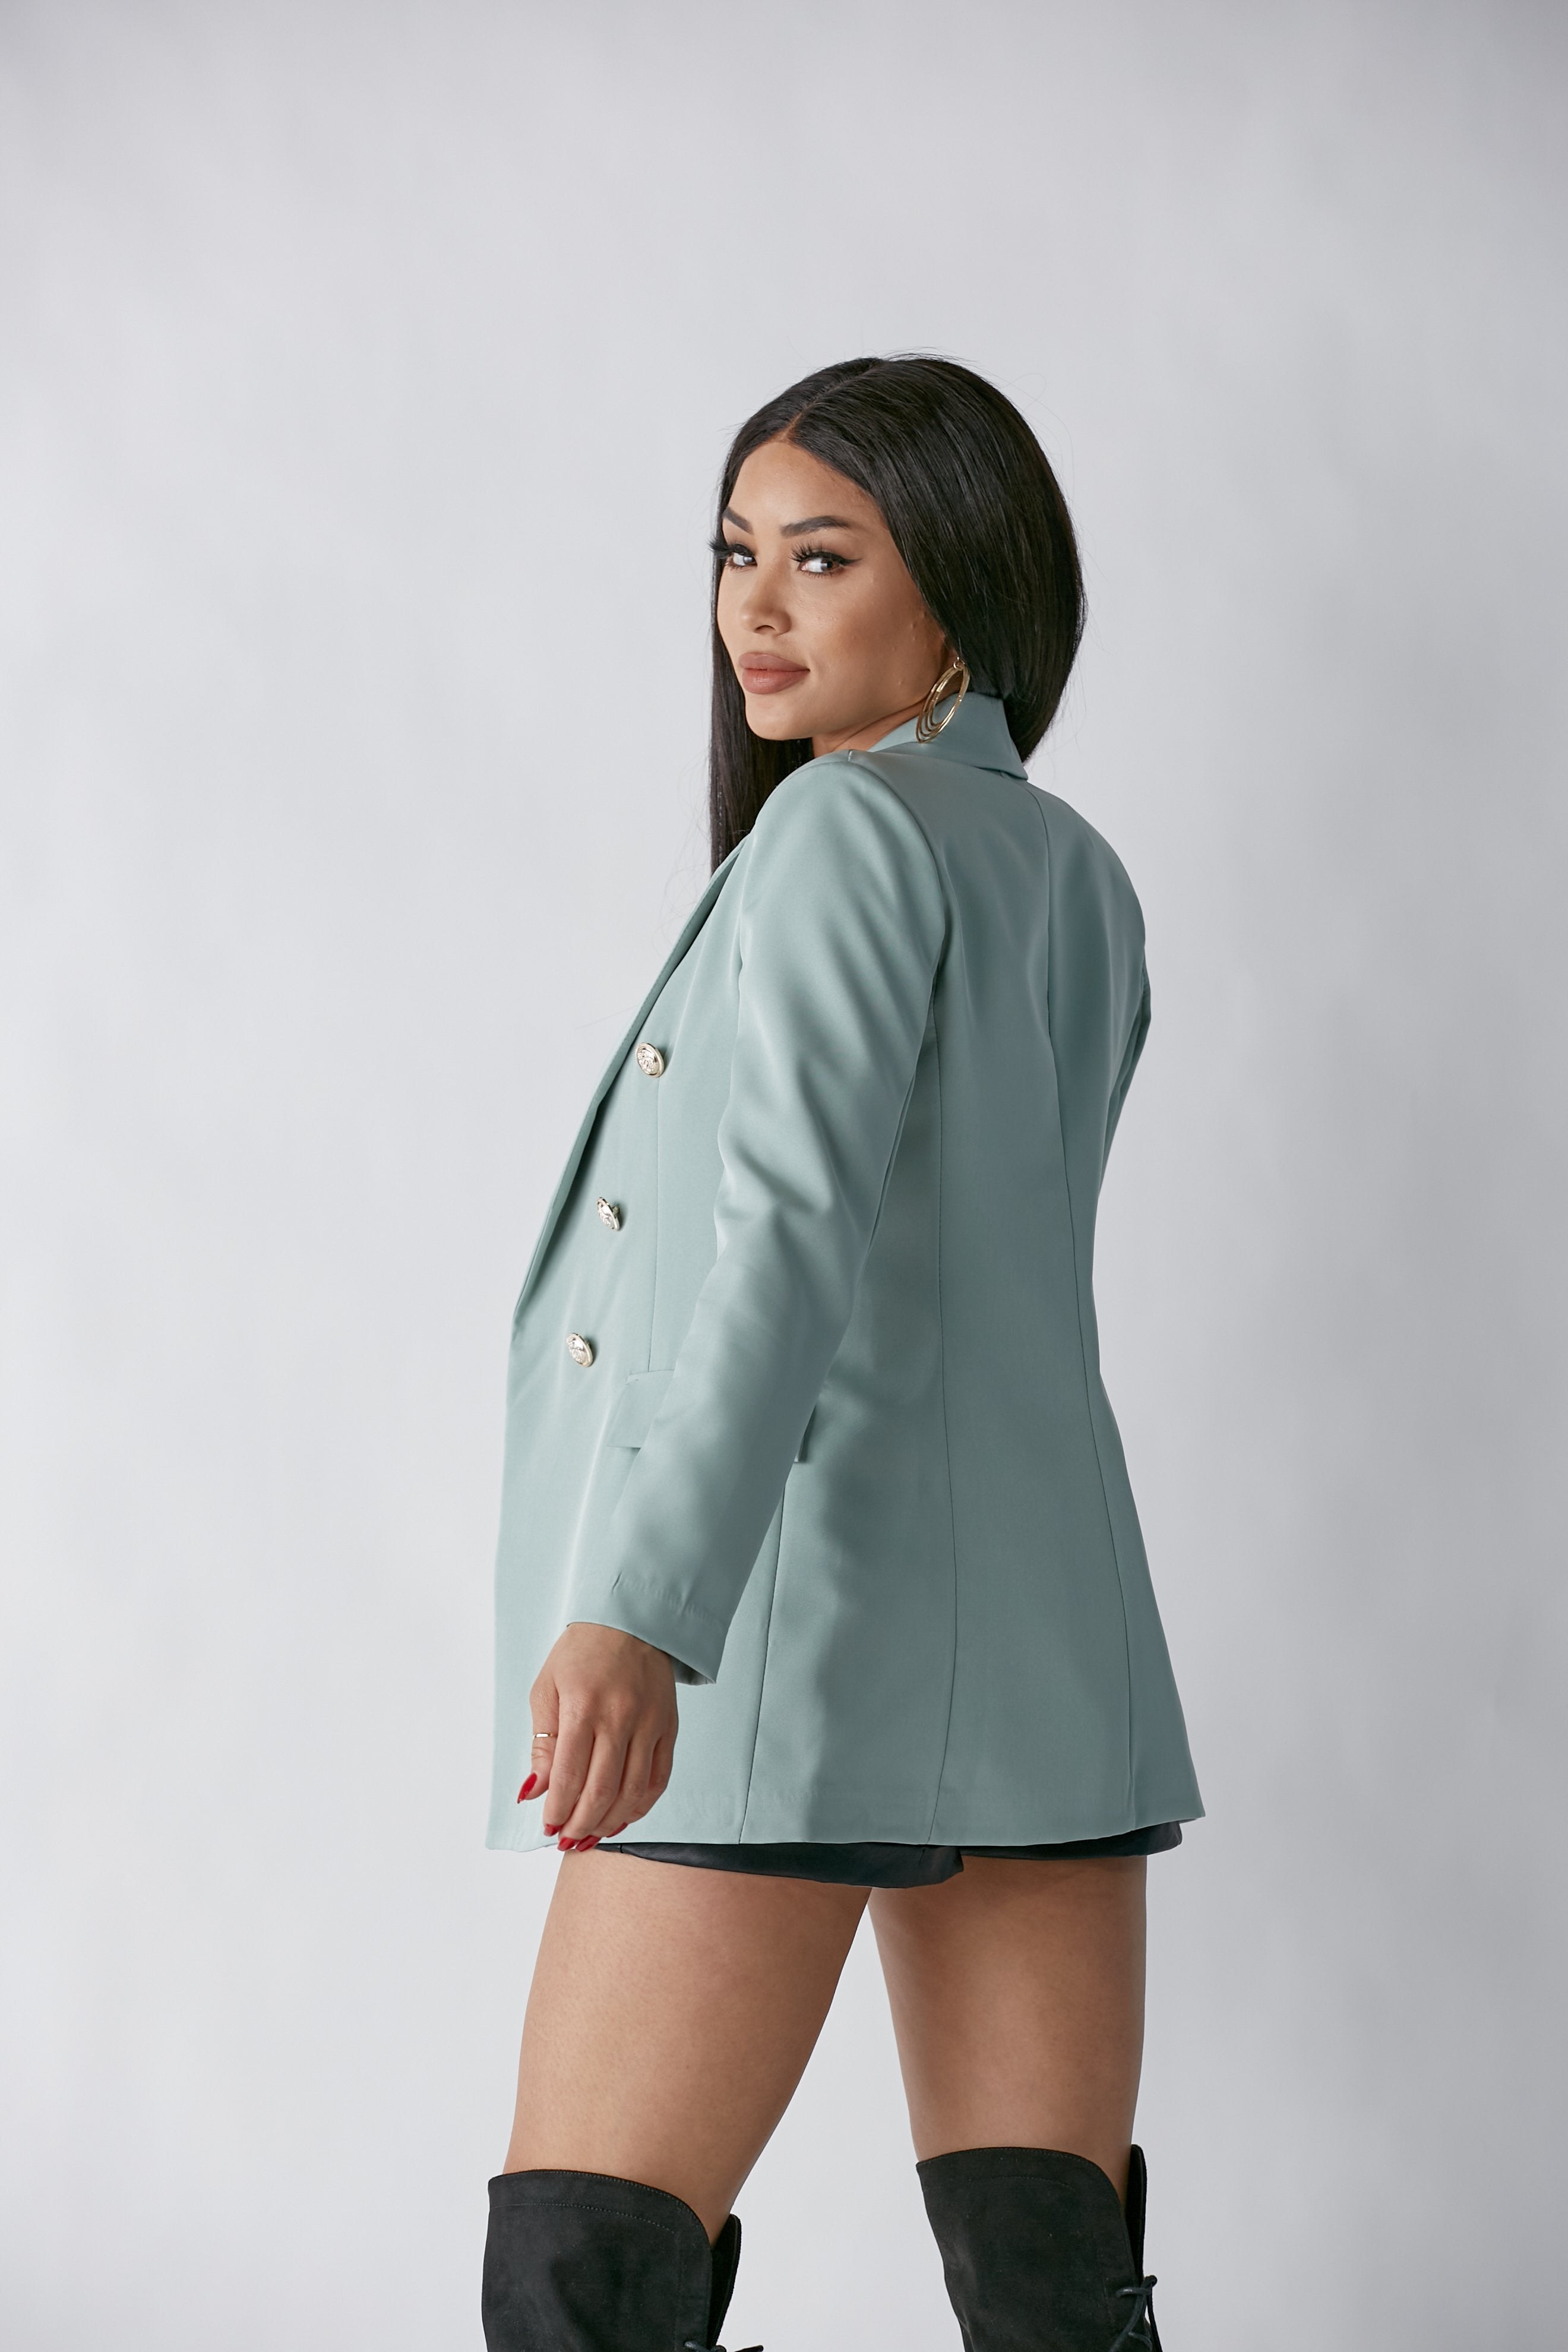 Head Babe In Charge Silver Button Detail Blazer